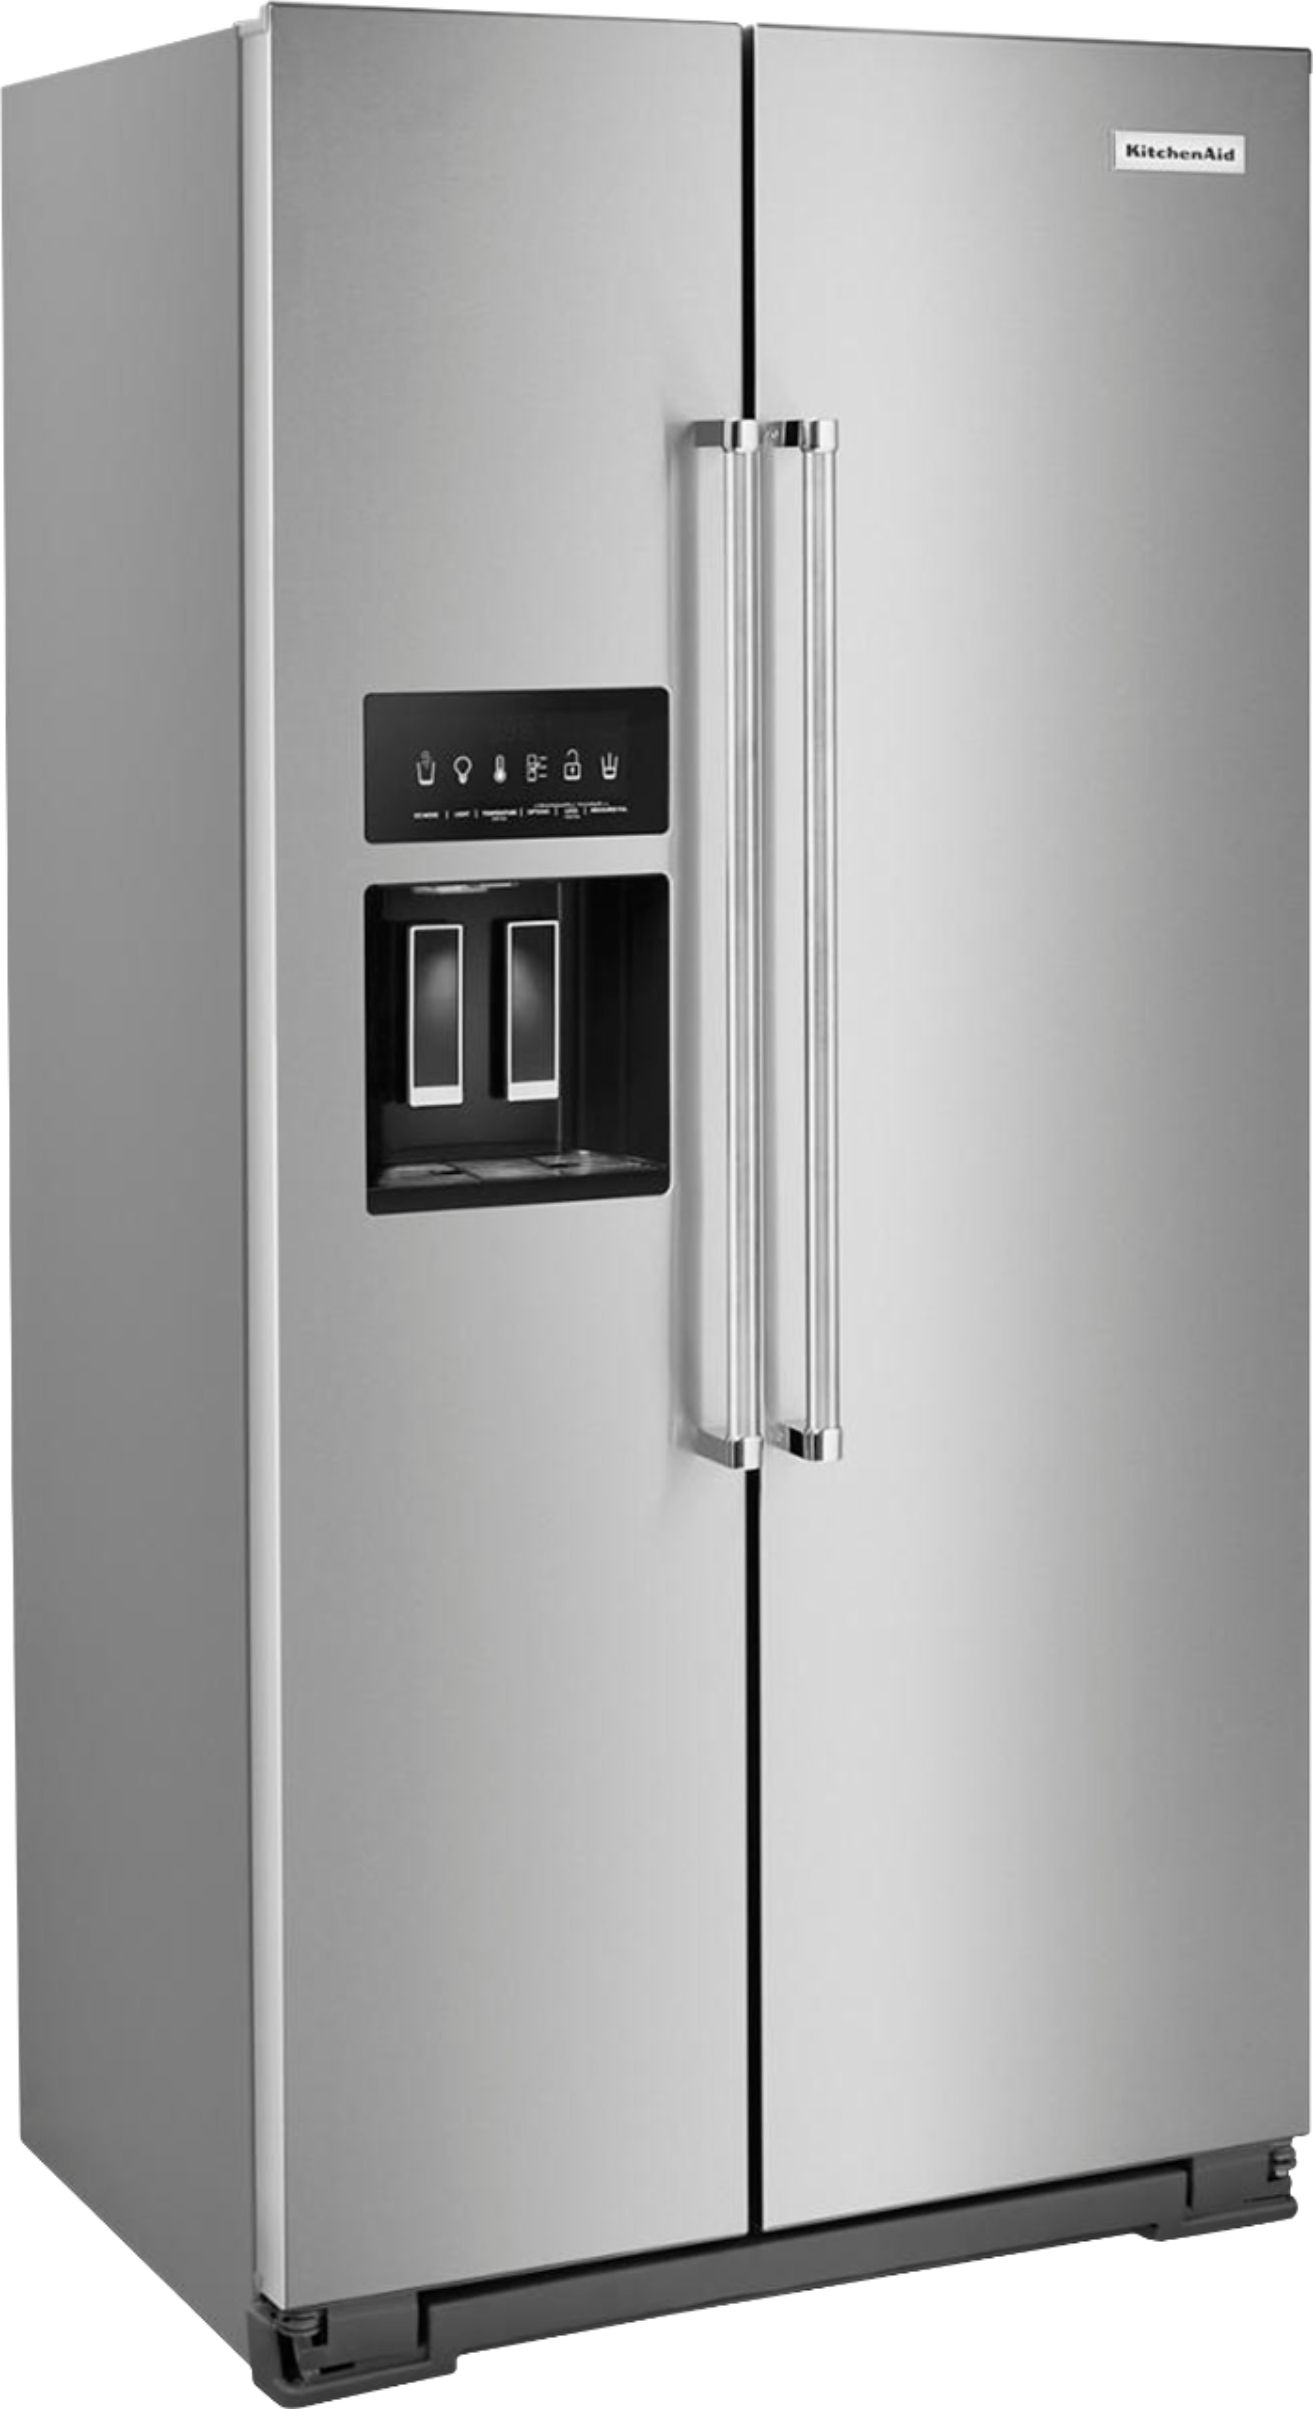 Angle View: Fulgor Milano - Professional Series 19.9" French Door Counter-Depth Refrigerator - Stainless steel